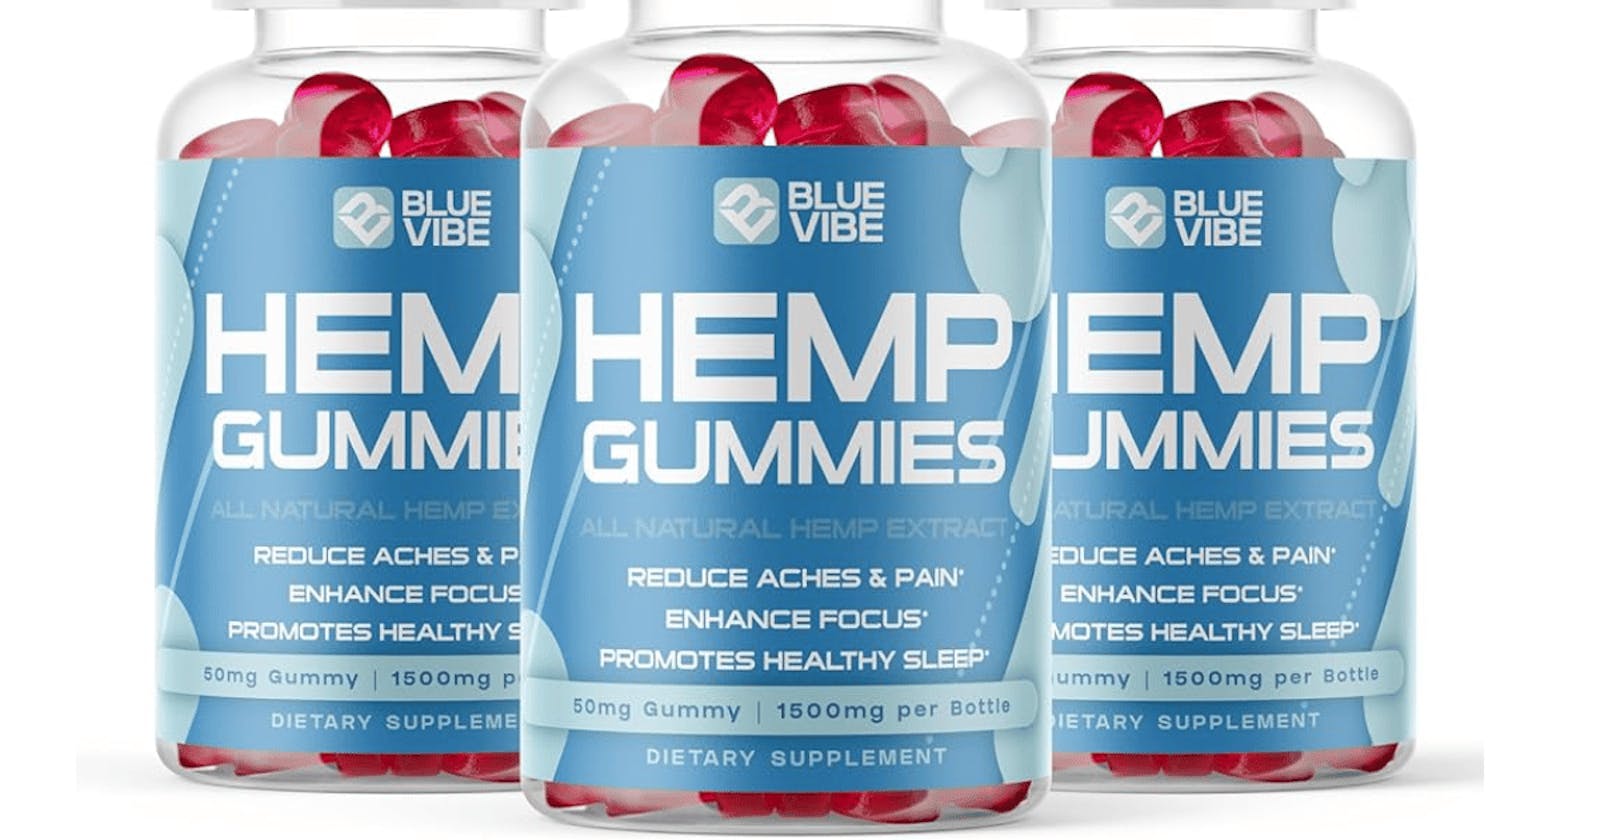 Blue Vibe CBD Gummies Price And Details For The New CBD Product